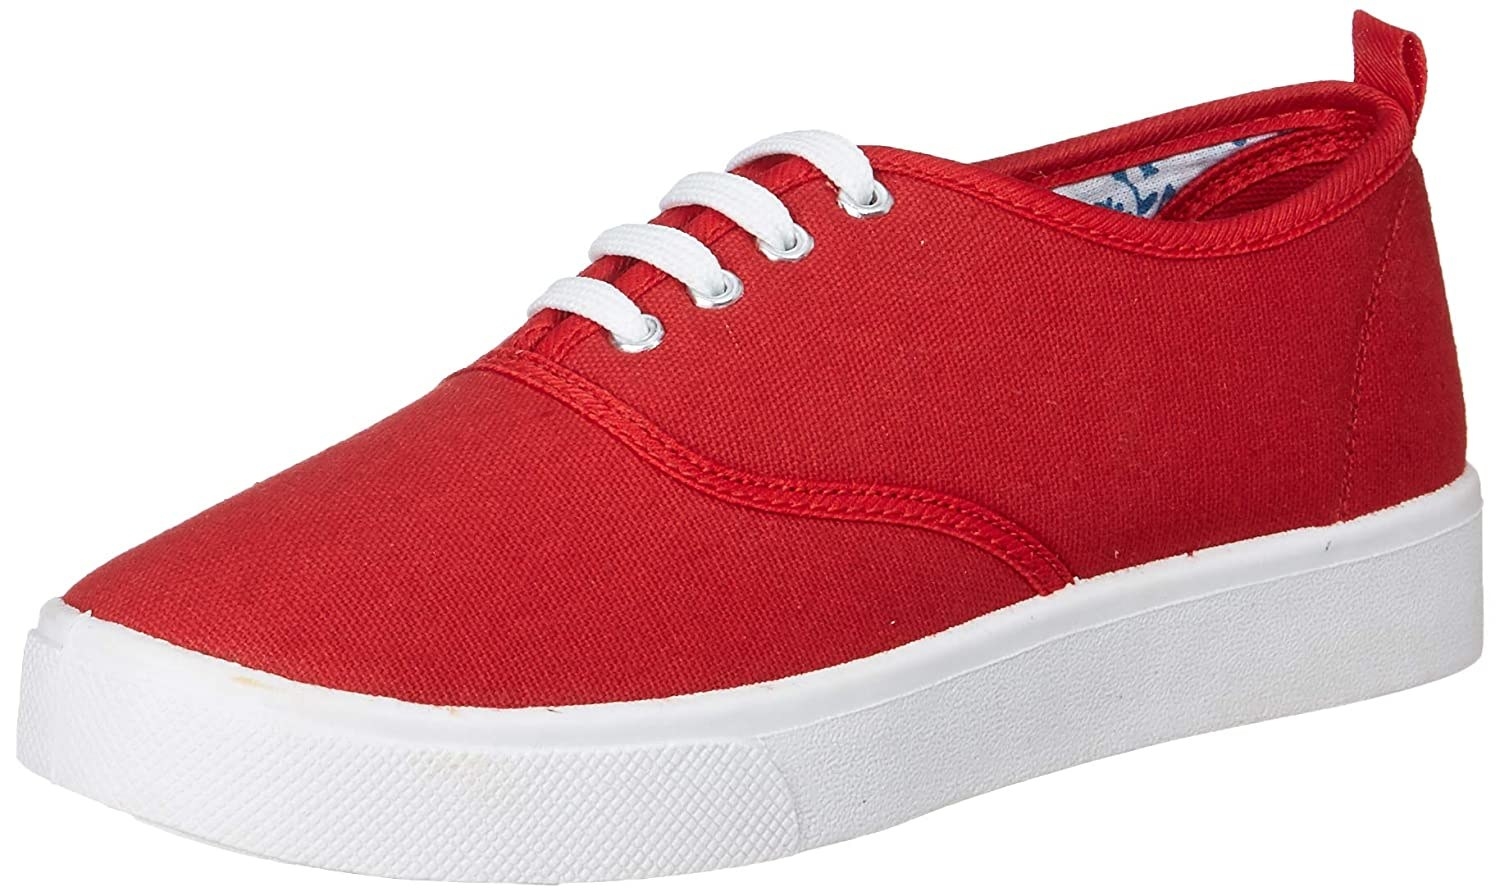 A pair of red sneakers 